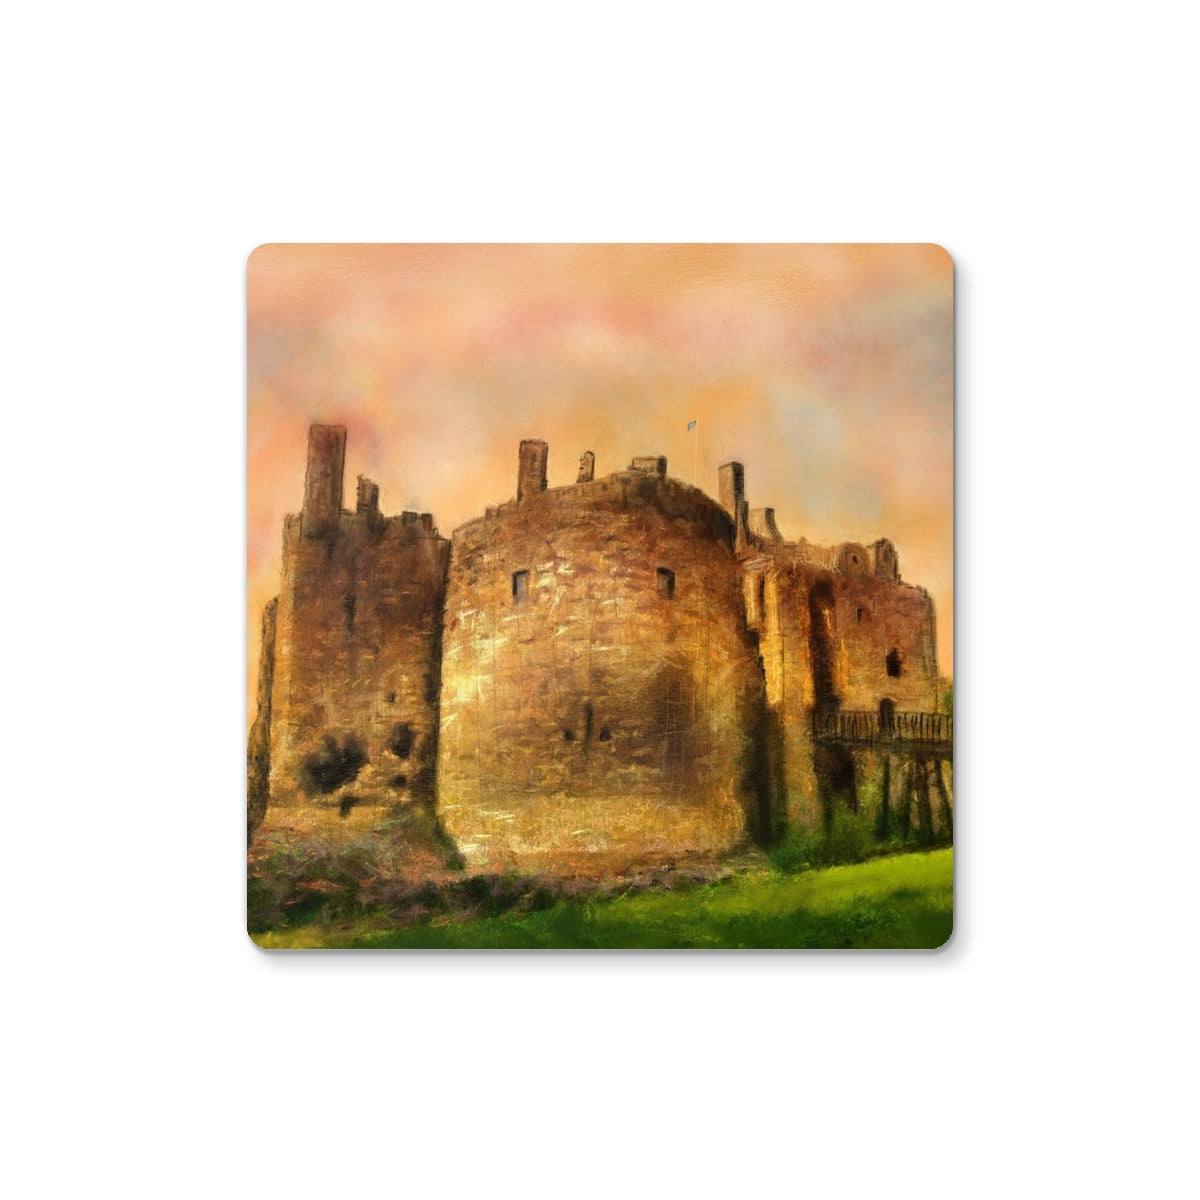 Dirleton Castle Art Gifts Coaster-Coasters-Historic & Iconic Scotland Art Gallery-2 Coasters-Paintings, Prints, Homeware, Art Gifts From Scotland By Scottish Artist Kevin Hunter